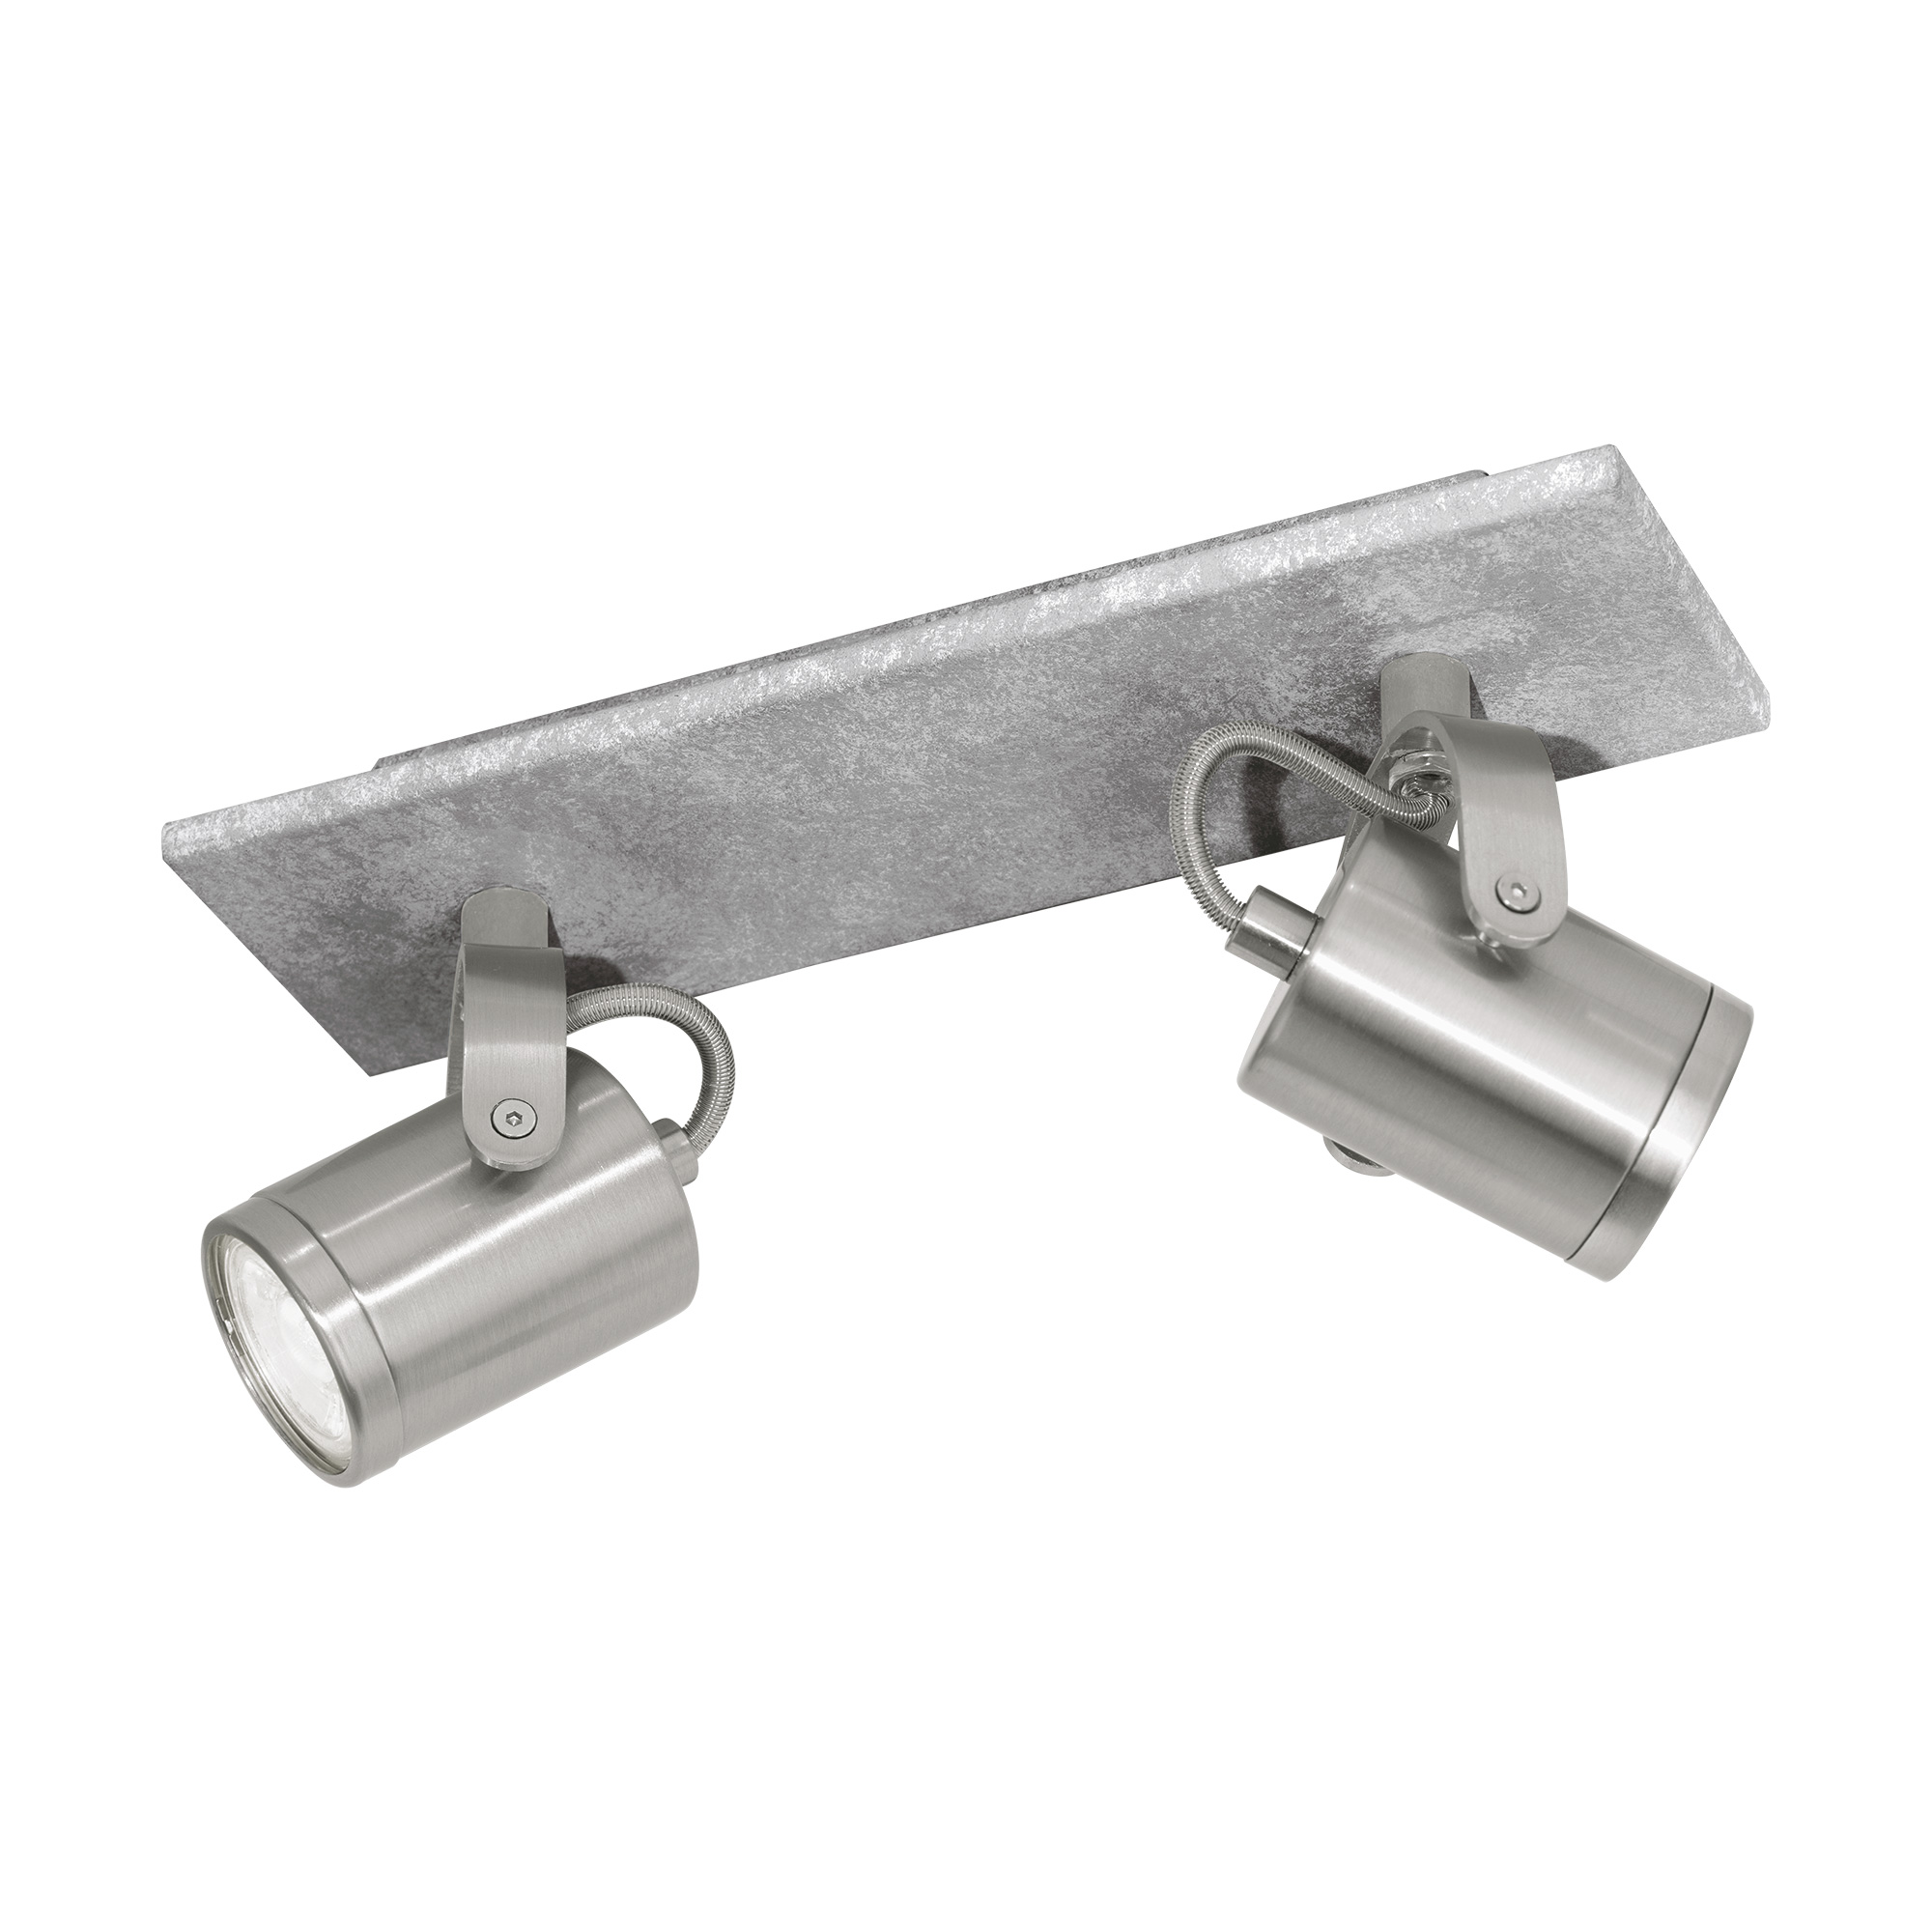 Eglo 95742A 2x5W Track Light w/ Concrete Grey Look Finish w/ Brushed Nickel & Chrome Lamp Heads